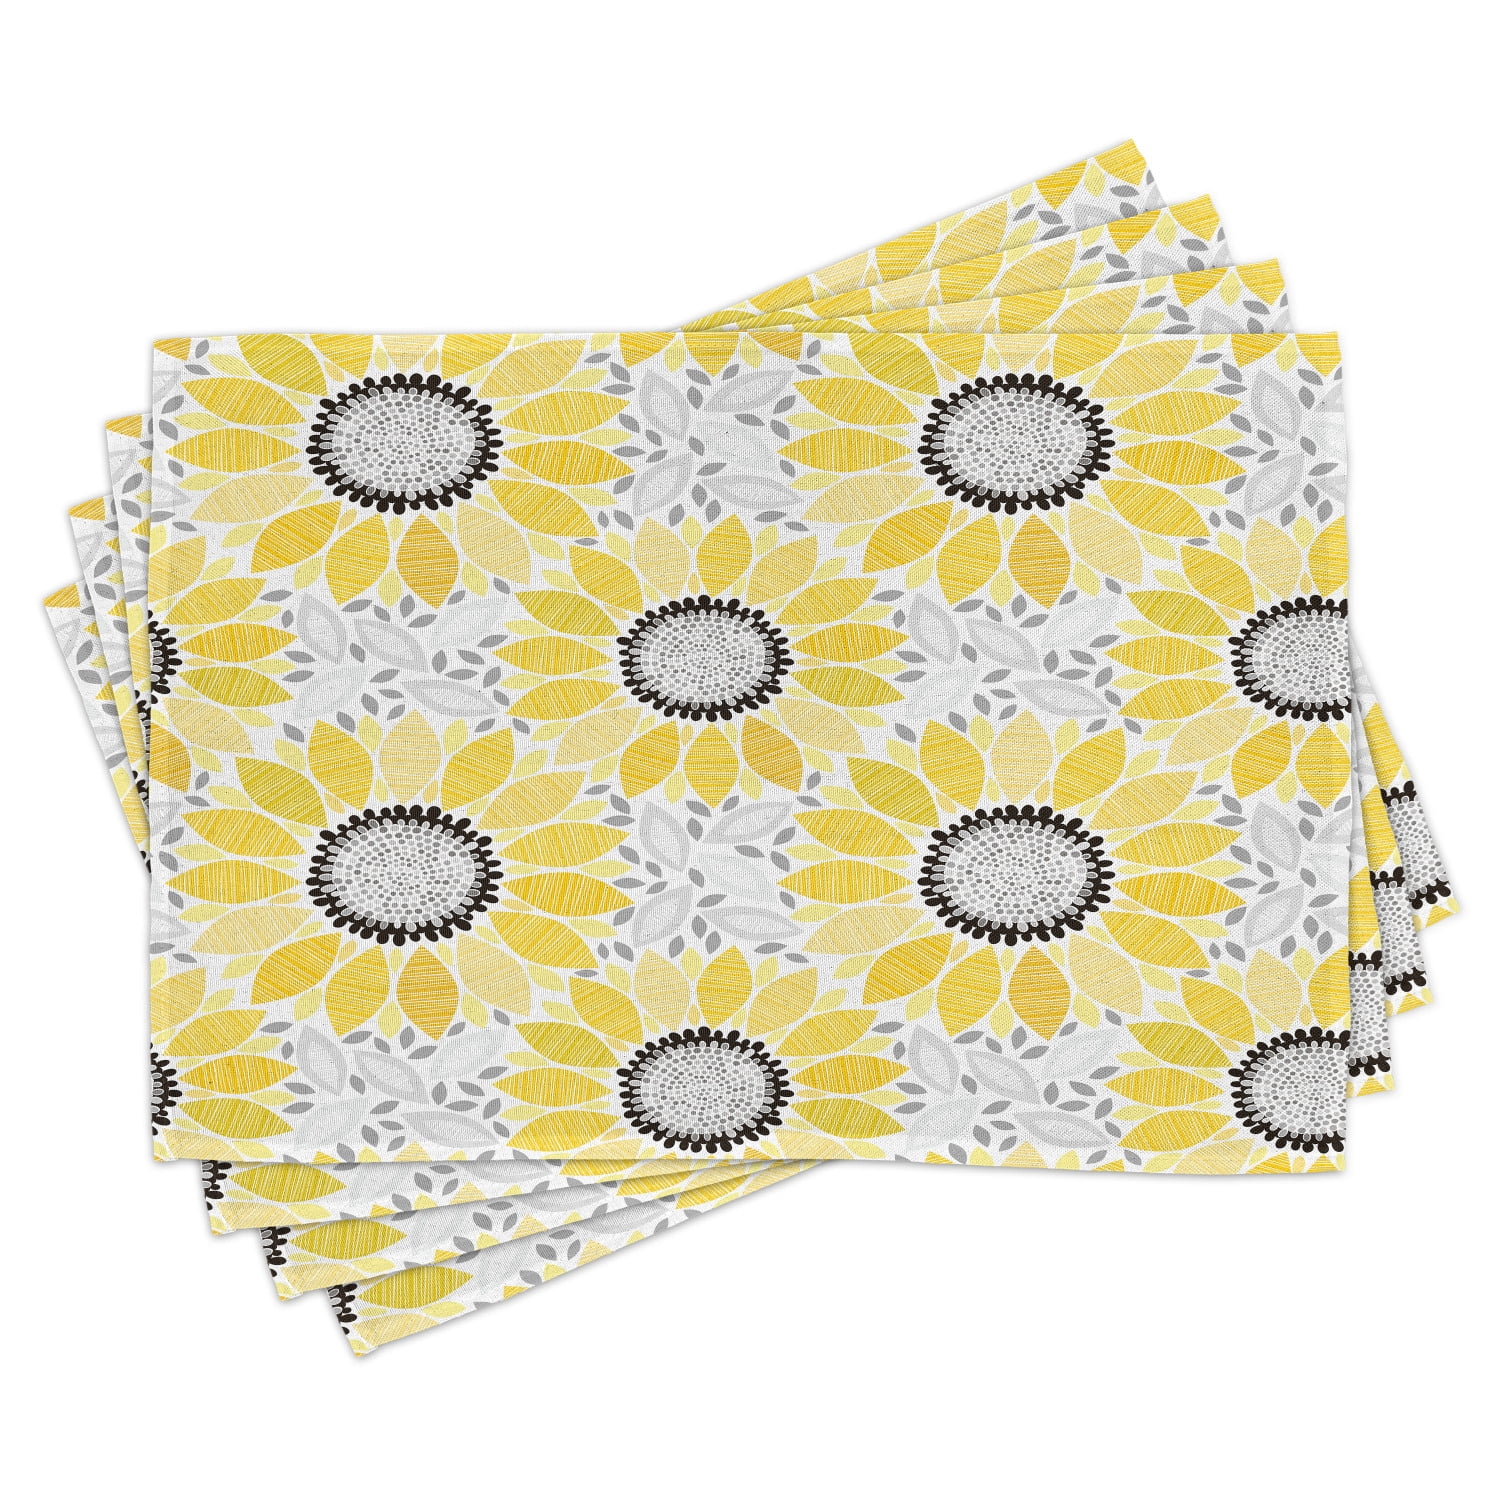 Yellow Placemats Reversible Cotton Placemats Cherries Placemats Summer Placemats Retro Placemats Green Placemats Set of 2